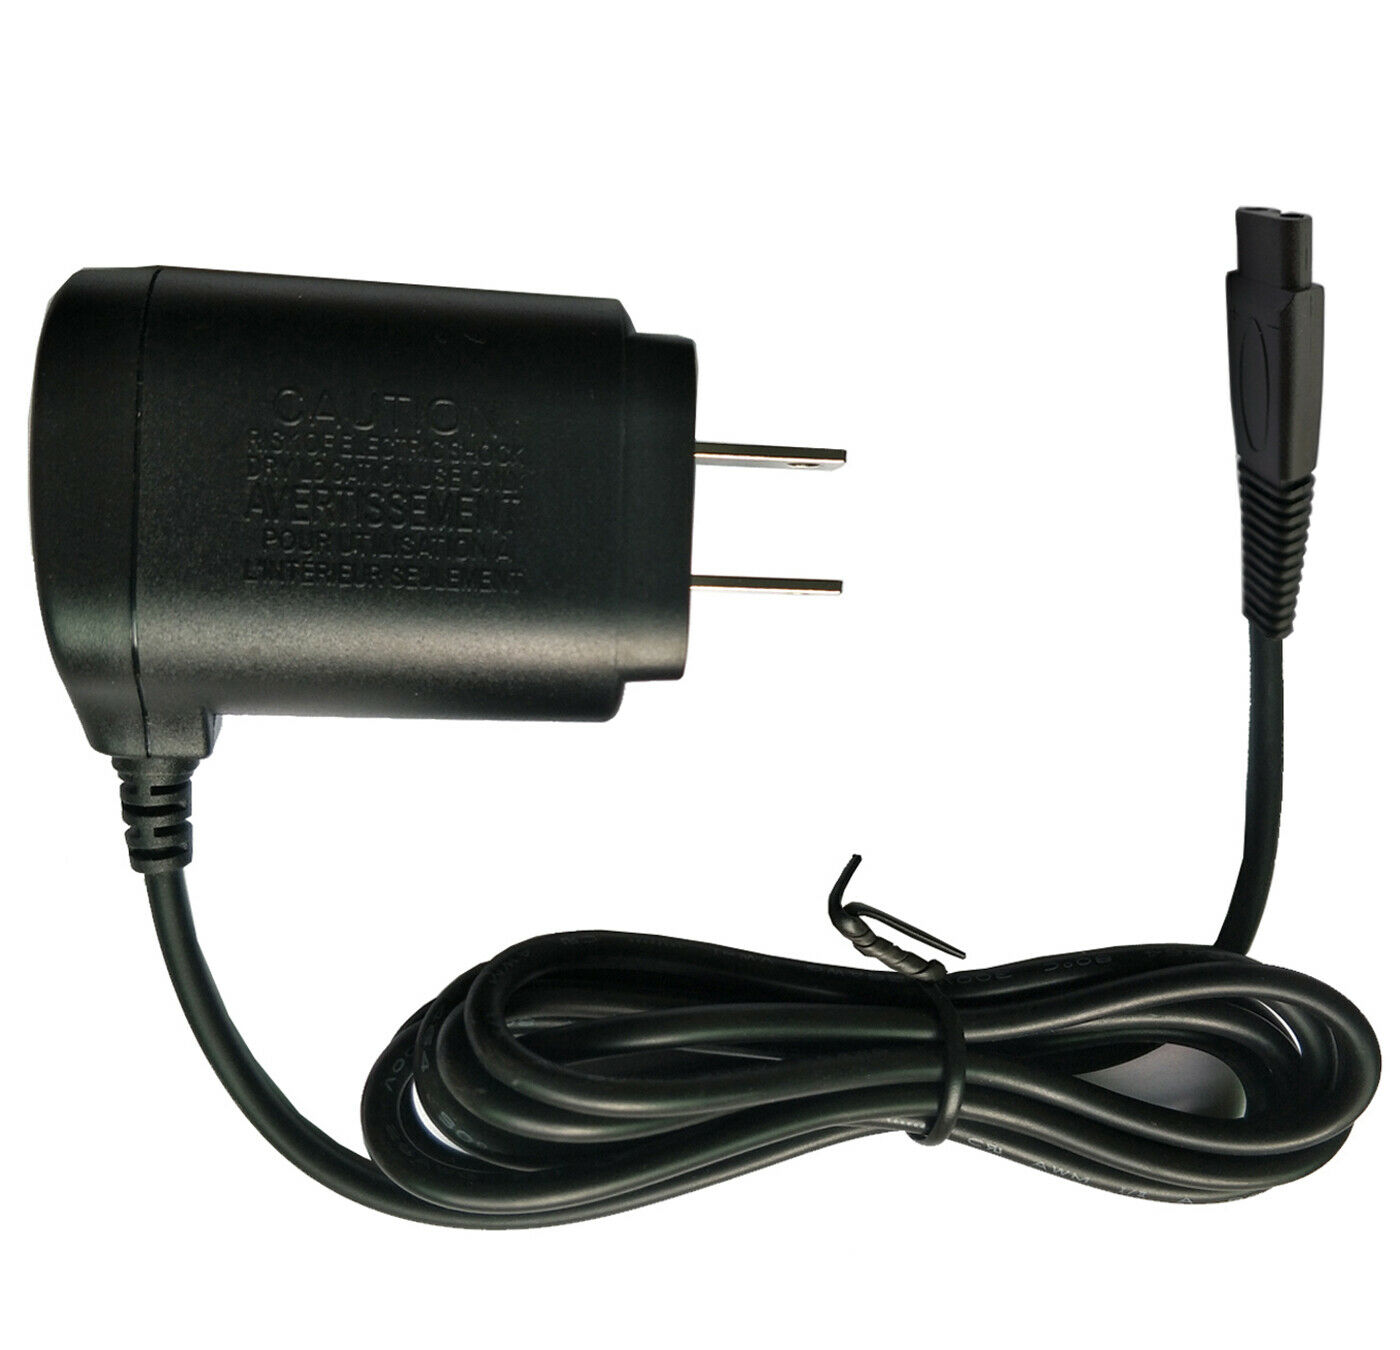 AC Adapter for Manscaped The Lawn Mower 3.0 Groin Grooming Hair Trimmer Shaver Type: AC/DC Adapter Features: Powered